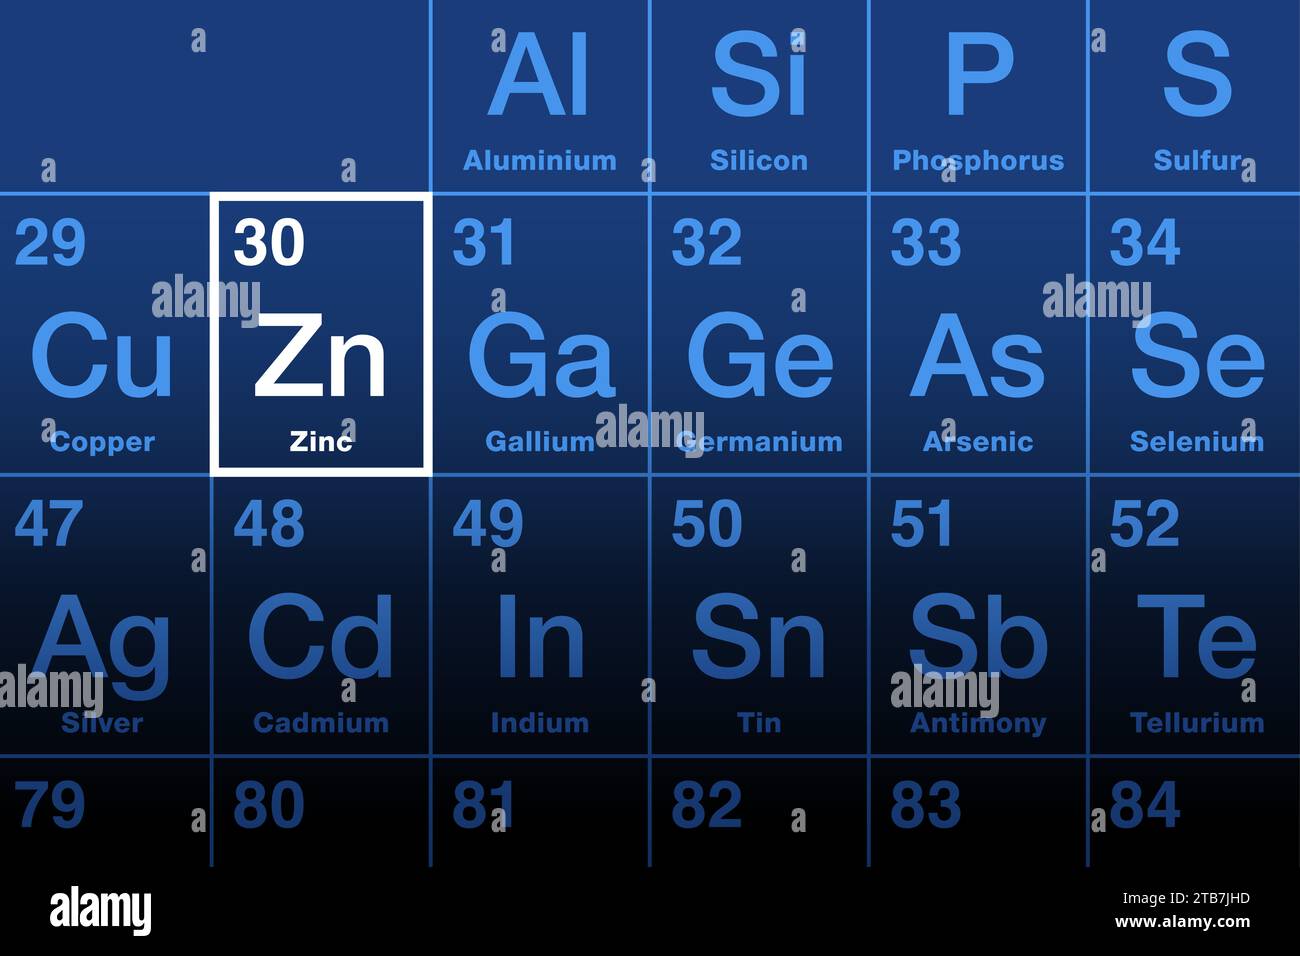 Zinc element on the periodic table, with atomic number 30 and element symbol Zn from German word Zinke. Slightly brittle metal and essential mineral. Stock Photo